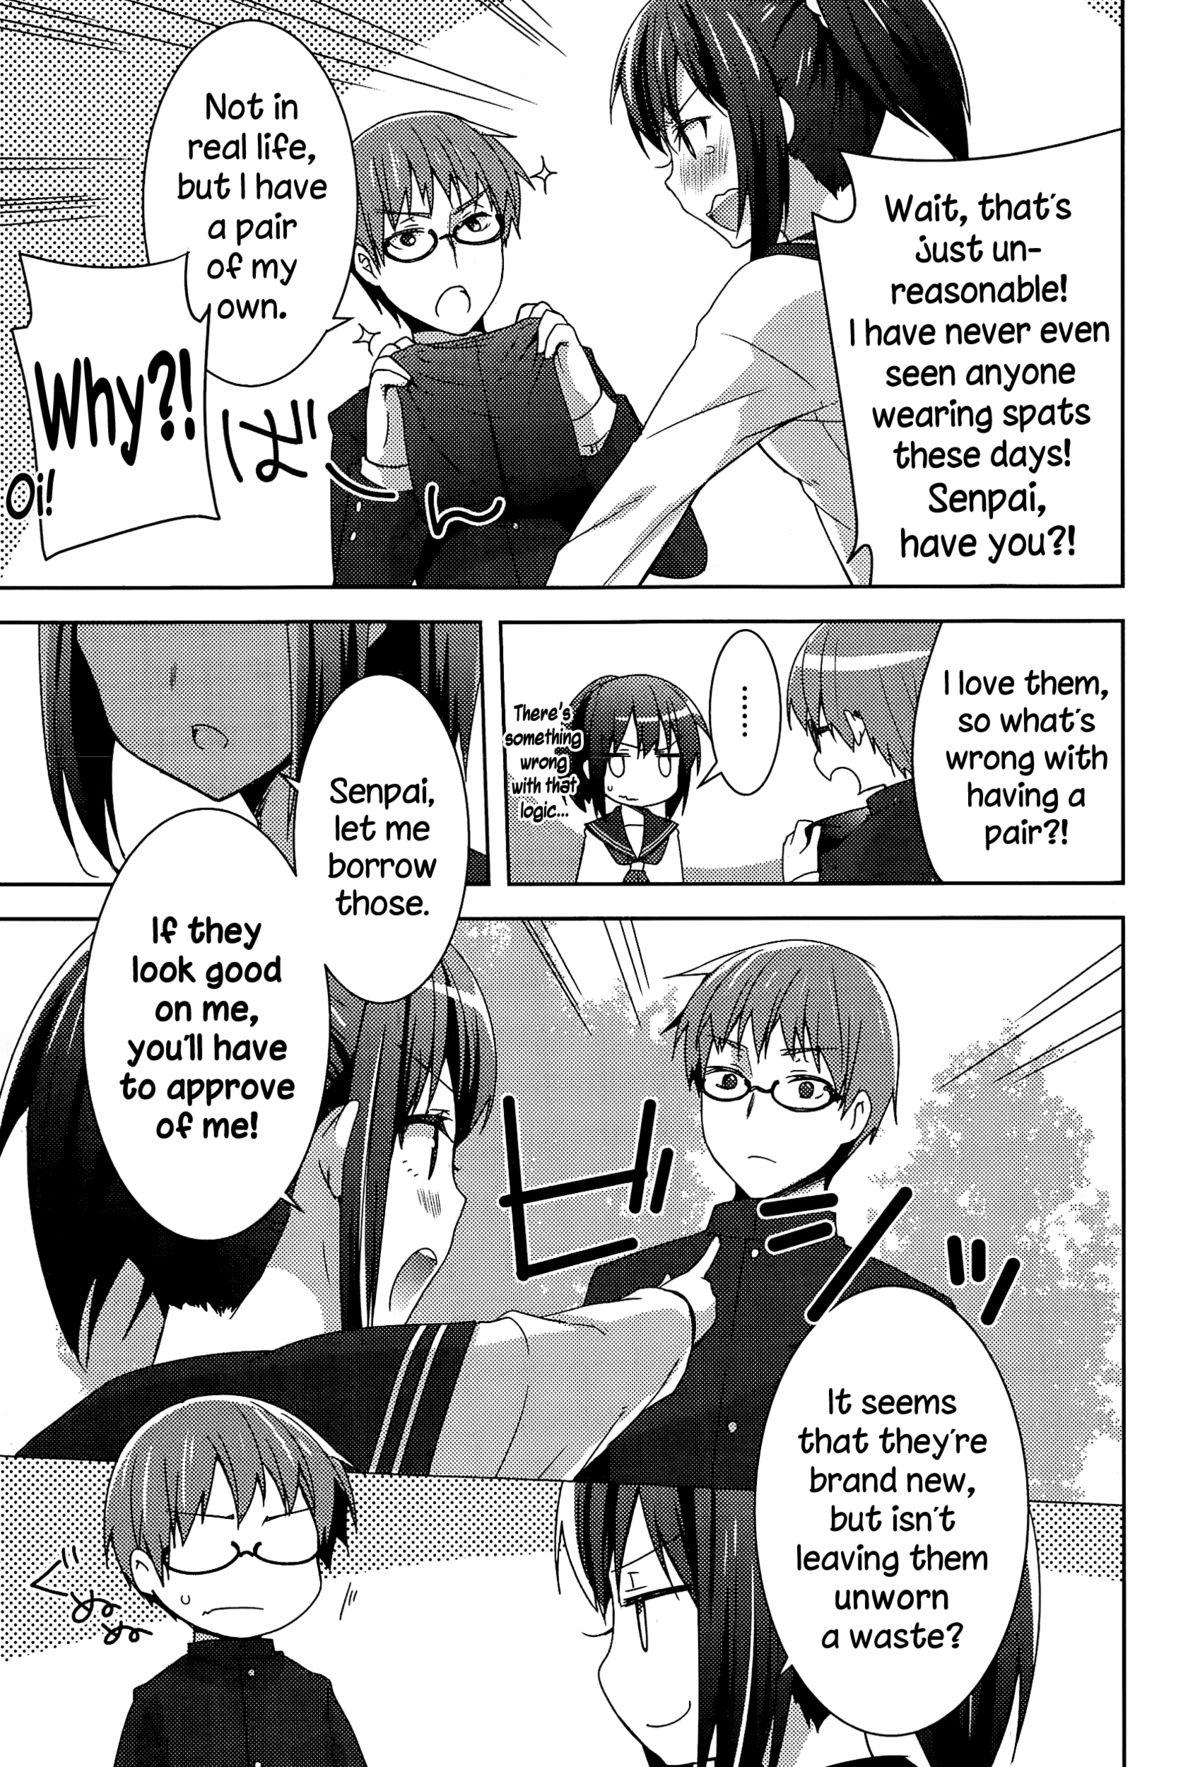 Orgy Houkago Spats Woman - Page 7